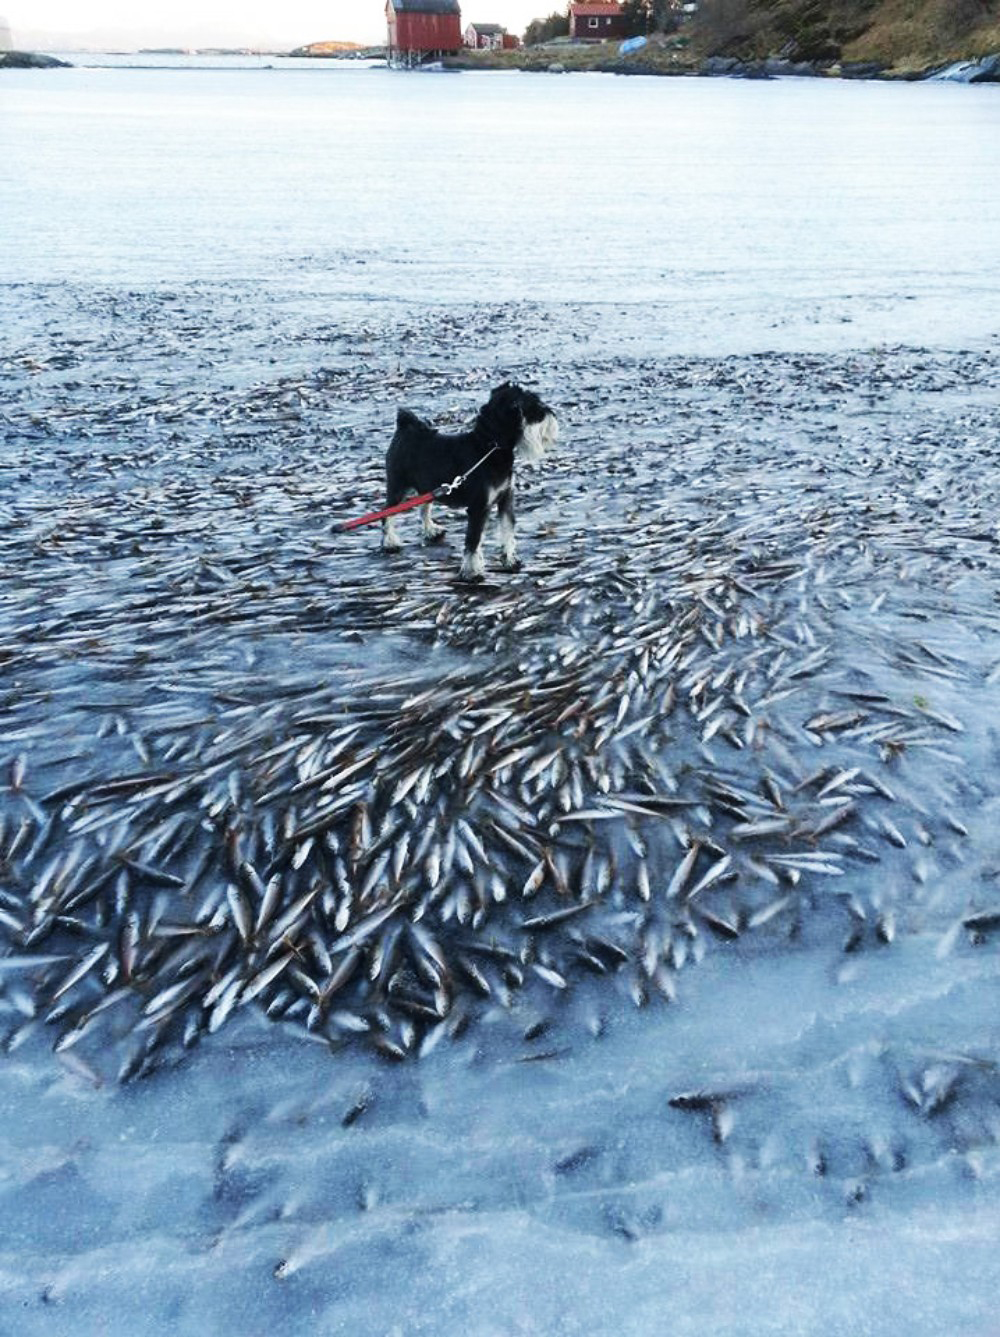 Norwegian public radio reported on the instant death of thousands of fish in a bay in the island of Lovund, Norway. An air temperature of -7.8 C (17.96 F) combined with a strong east wind froze the sea water instantly, trapping and killing the fish you can see in this fishapocalyptic image. The dog owner says that he has never seen such phenomenon